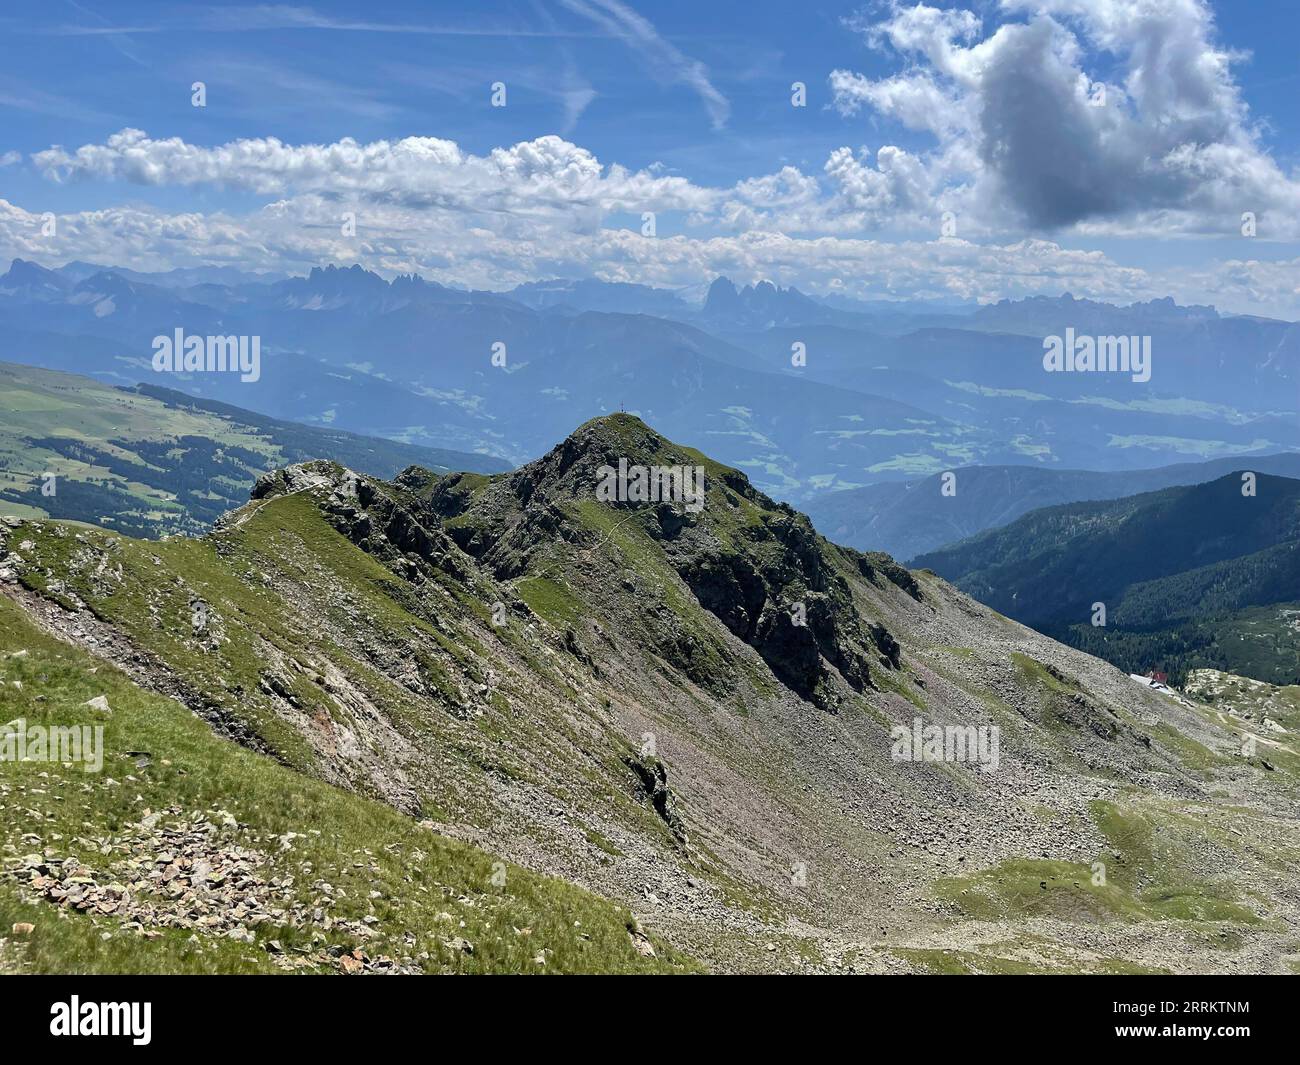 Valley view, peak of Ritzlar, hike to Latzfons Cross in South Tyrol, pilgrimage site, Sarntal Alps, 2300 m, viewpoint, Dolomites, Klausen, Latzfons, Wipptal, sun, mountains, clouds, nature, activity, Klausen, South Tyrol, Alto Adige, Italy Stock Photo